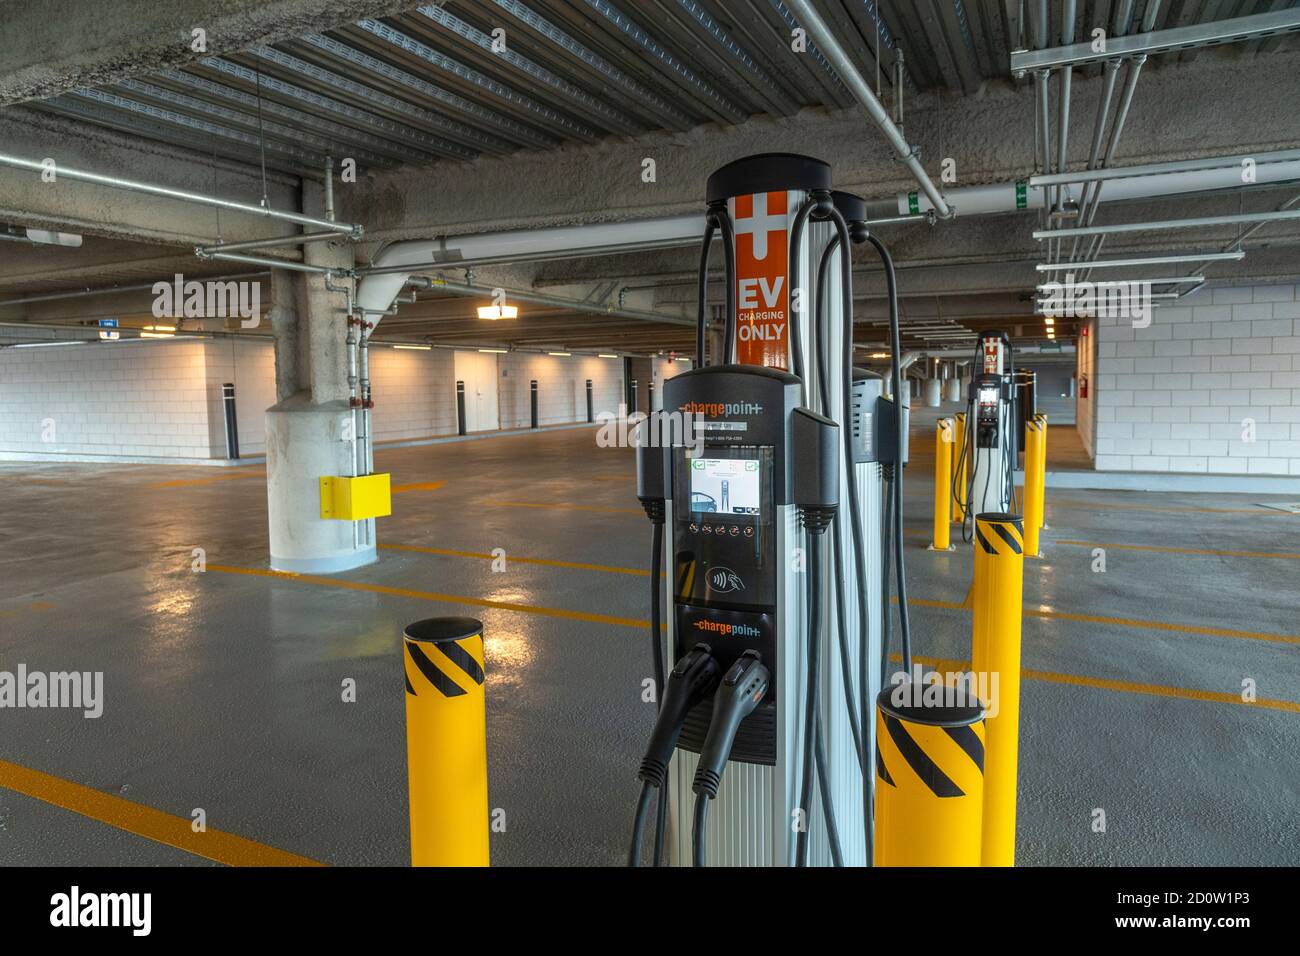 Public charging station for electric cars and vehicles, Boston USA Stock Photo